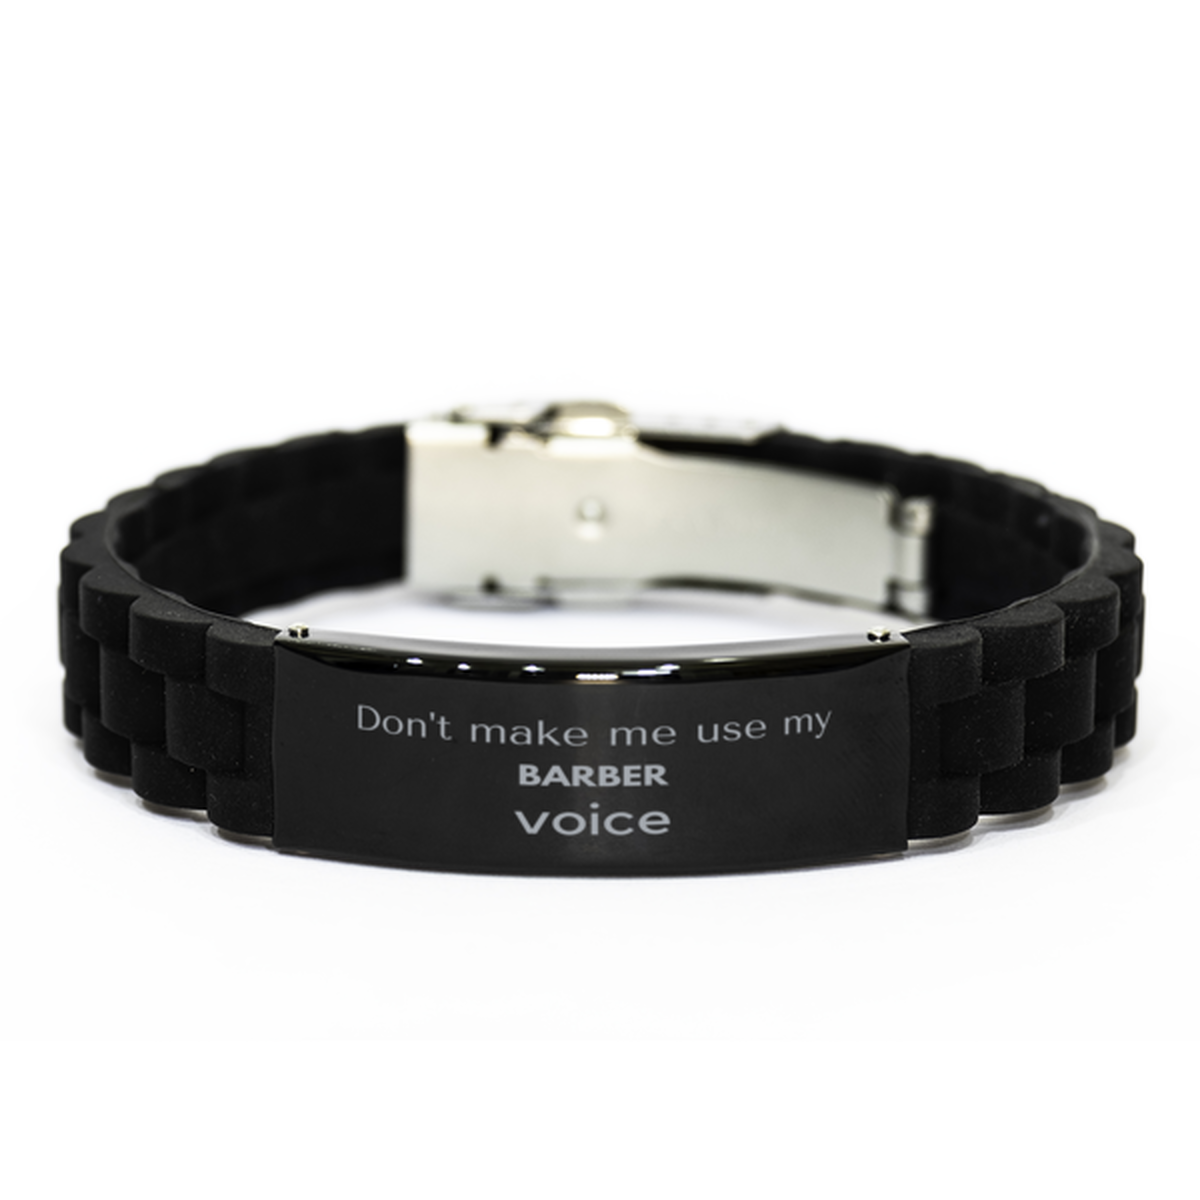 Don't make me use my Barber voice, Sarcasm Barber Gifts, Christmas Barber Black Glidelock Clasp Bracelet Birthday Unique Gifts For Barber Coworkers, Men, Women, Colleague, Friends